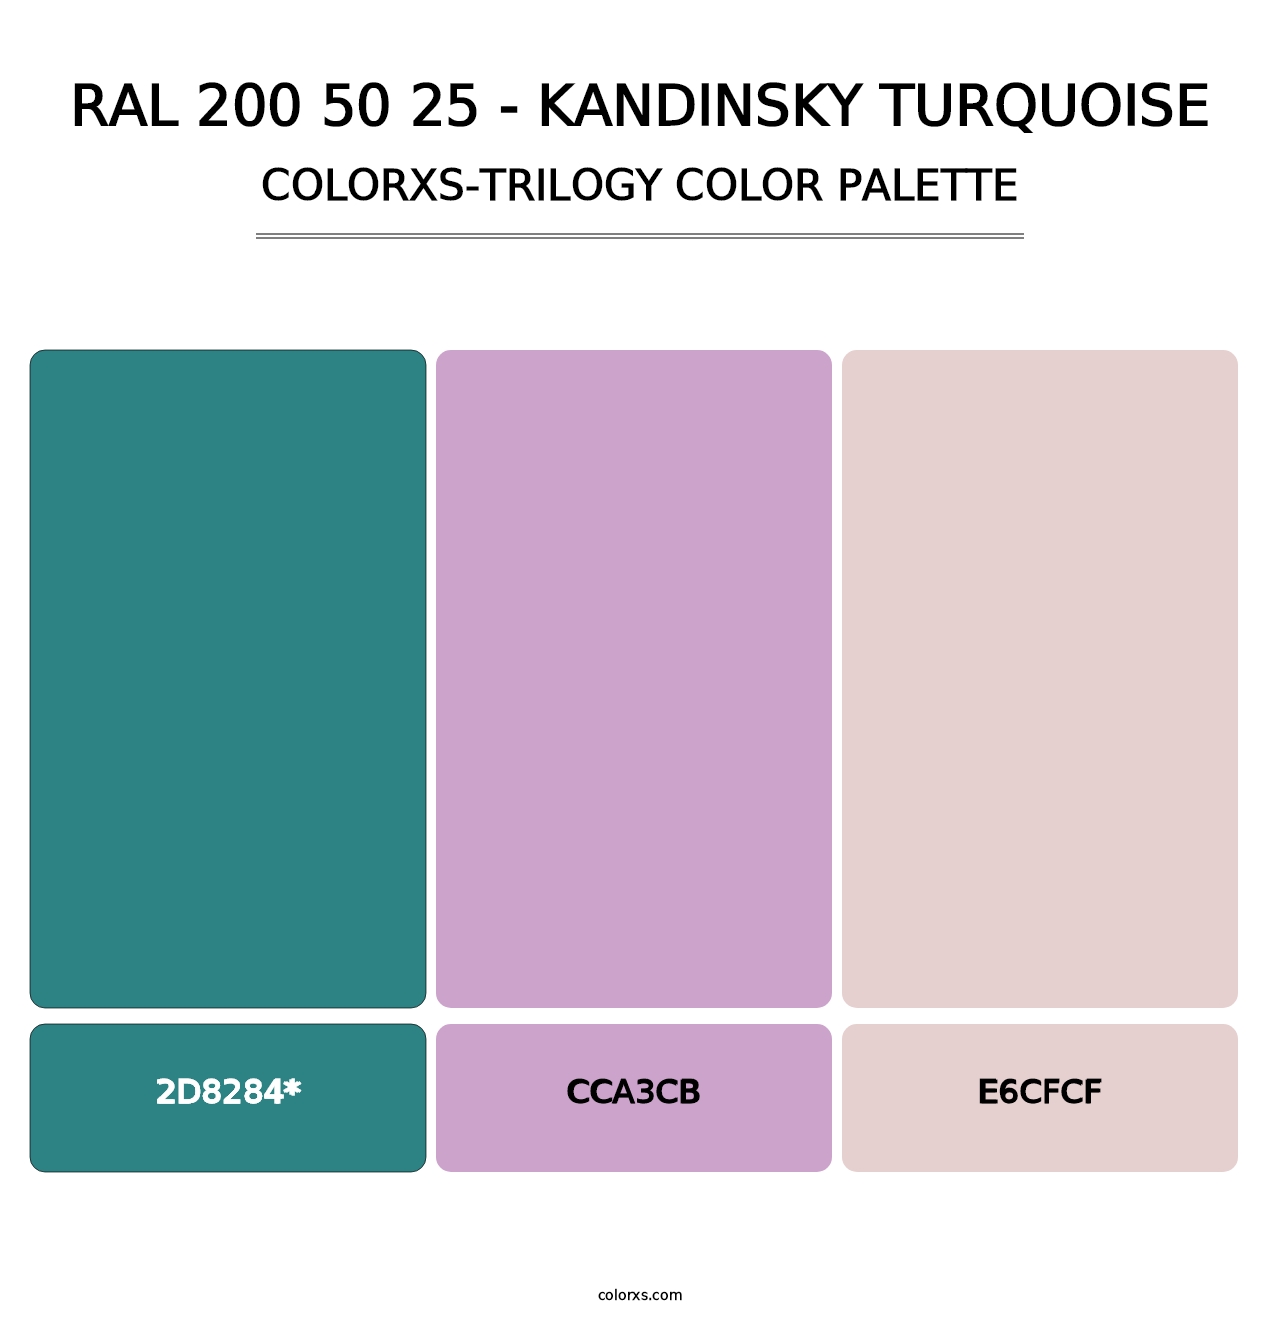 RAL 200 50 25 - Kandinsky Turquoise - Colorxs Trilogy Palette